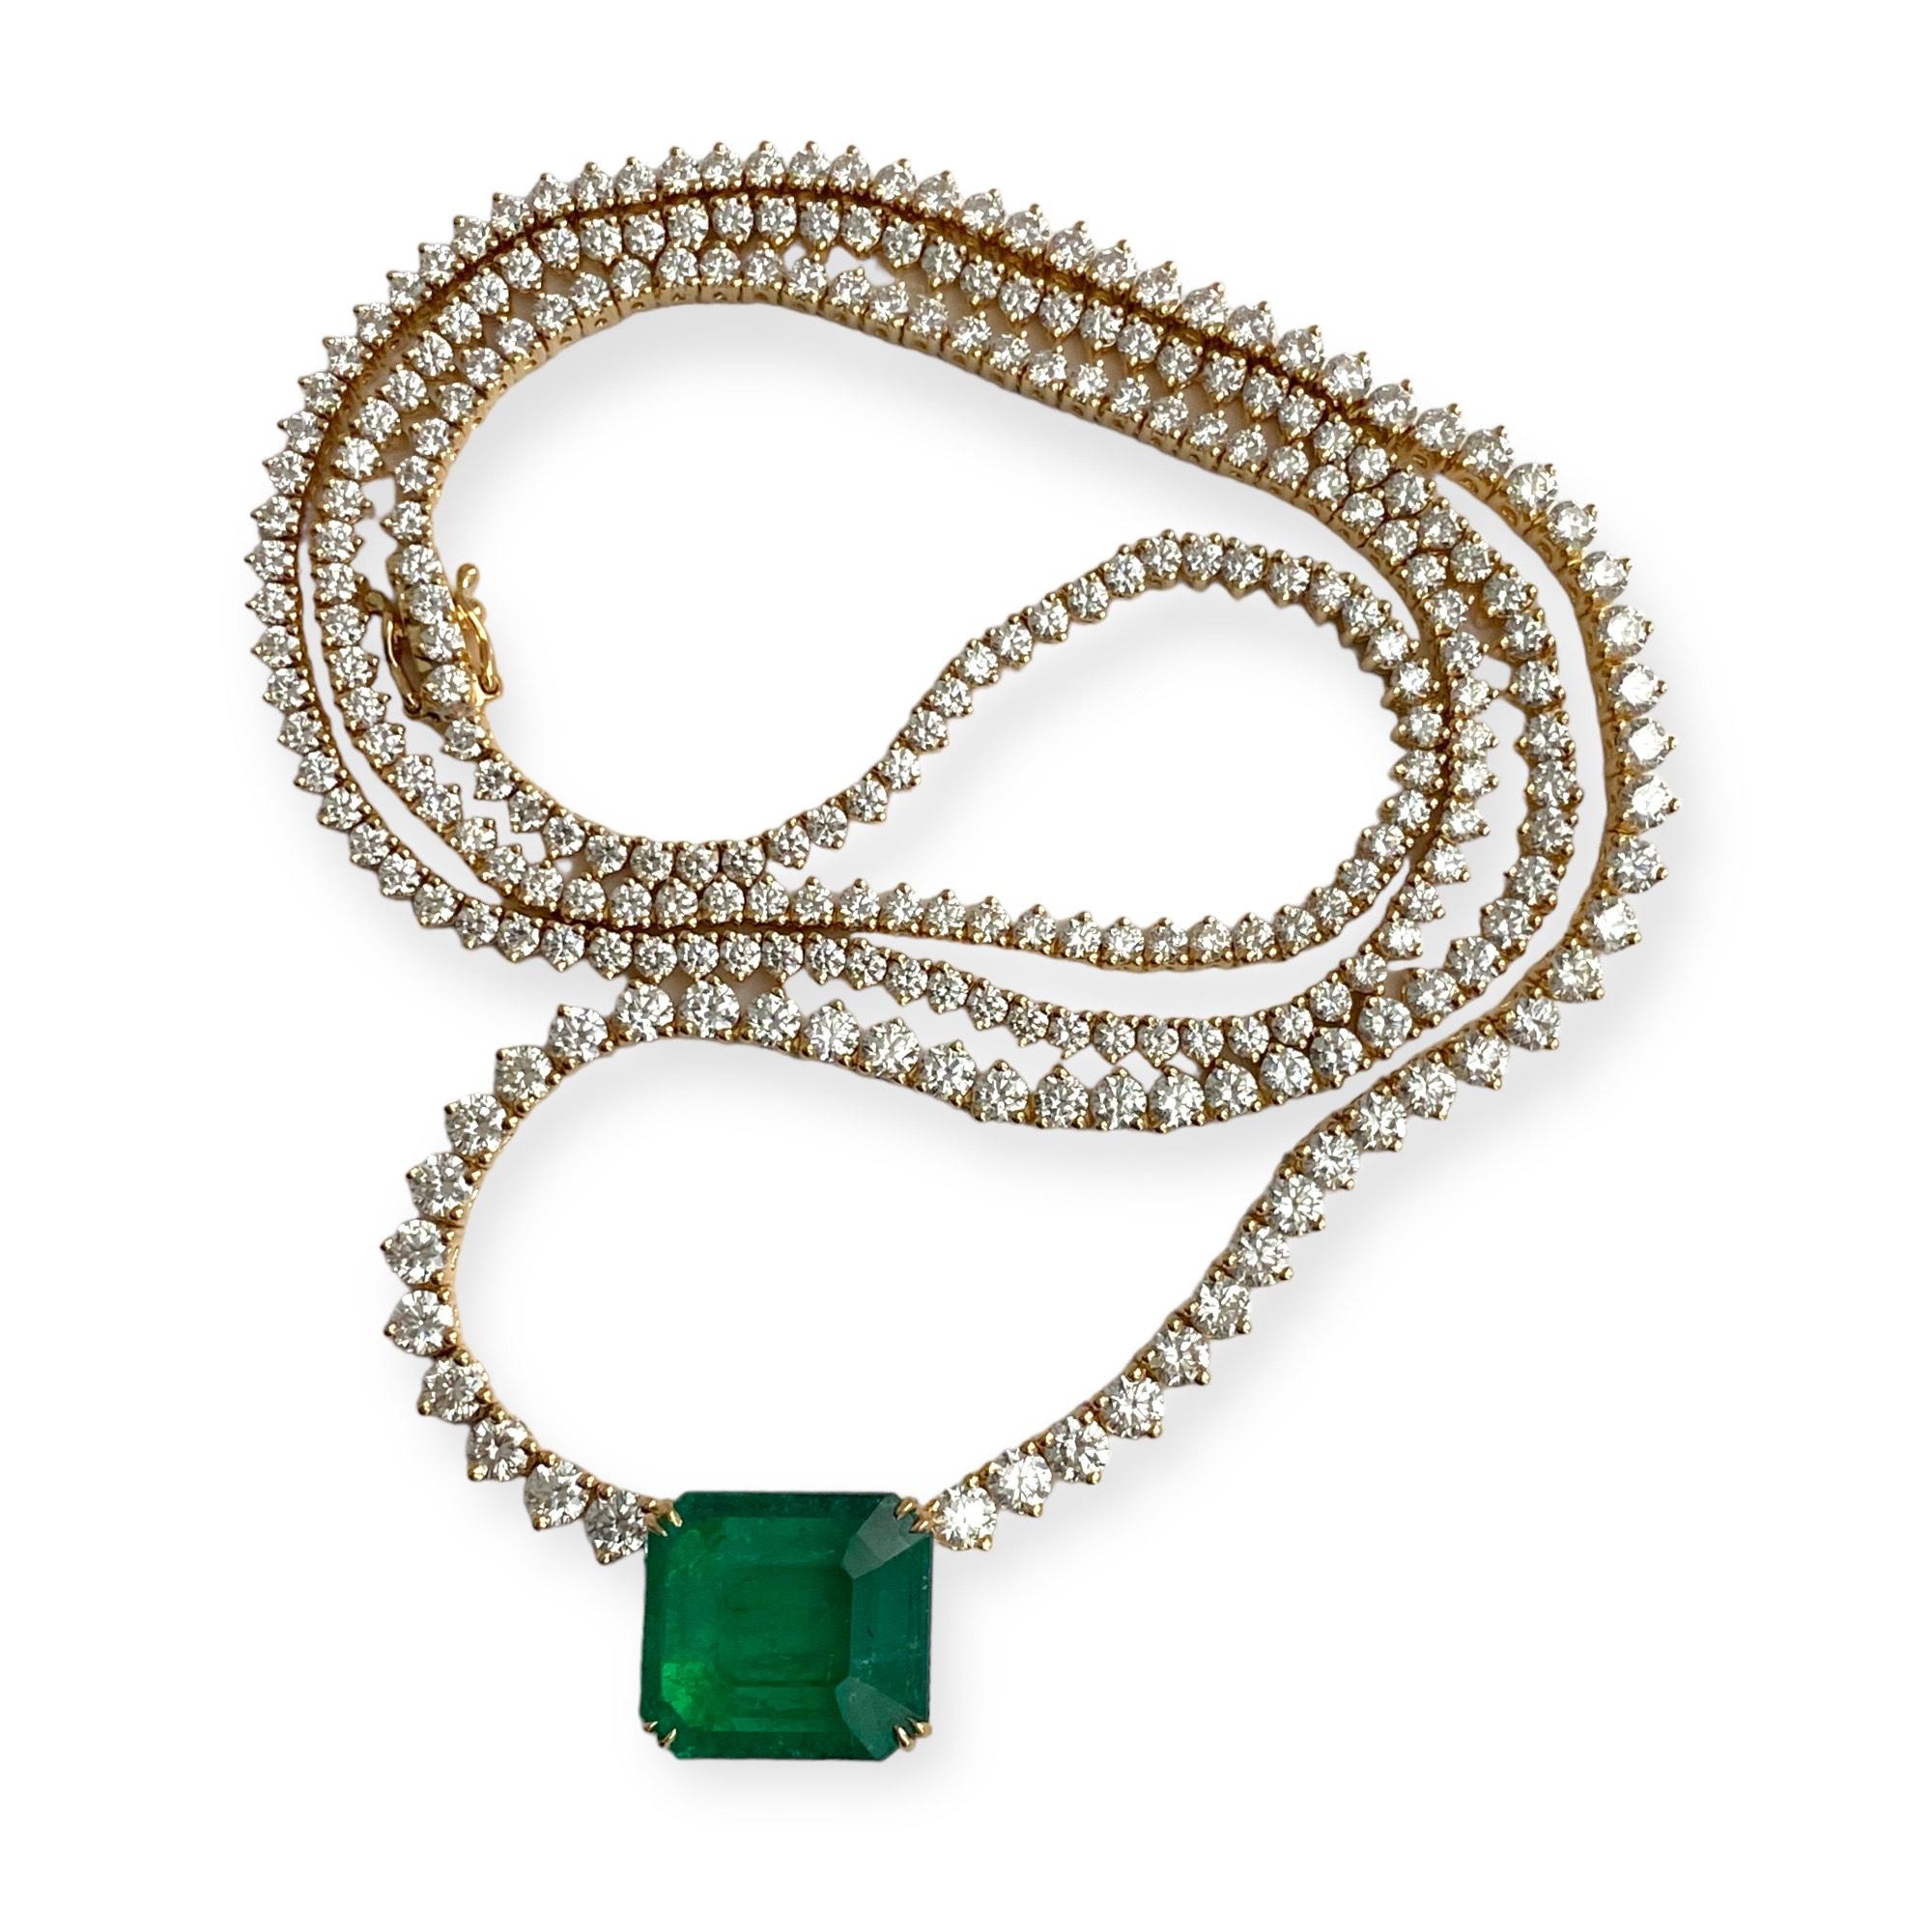 Significant 6.5 ct Emerald-cut Emerald pendant on a 24-inch, graduated Diamond necklace with 11ct all-around Diamonds set in 18k yellow gold.

This design is also available in  4 ct Emerald and 5ct half Diamond, half chain necklace.  